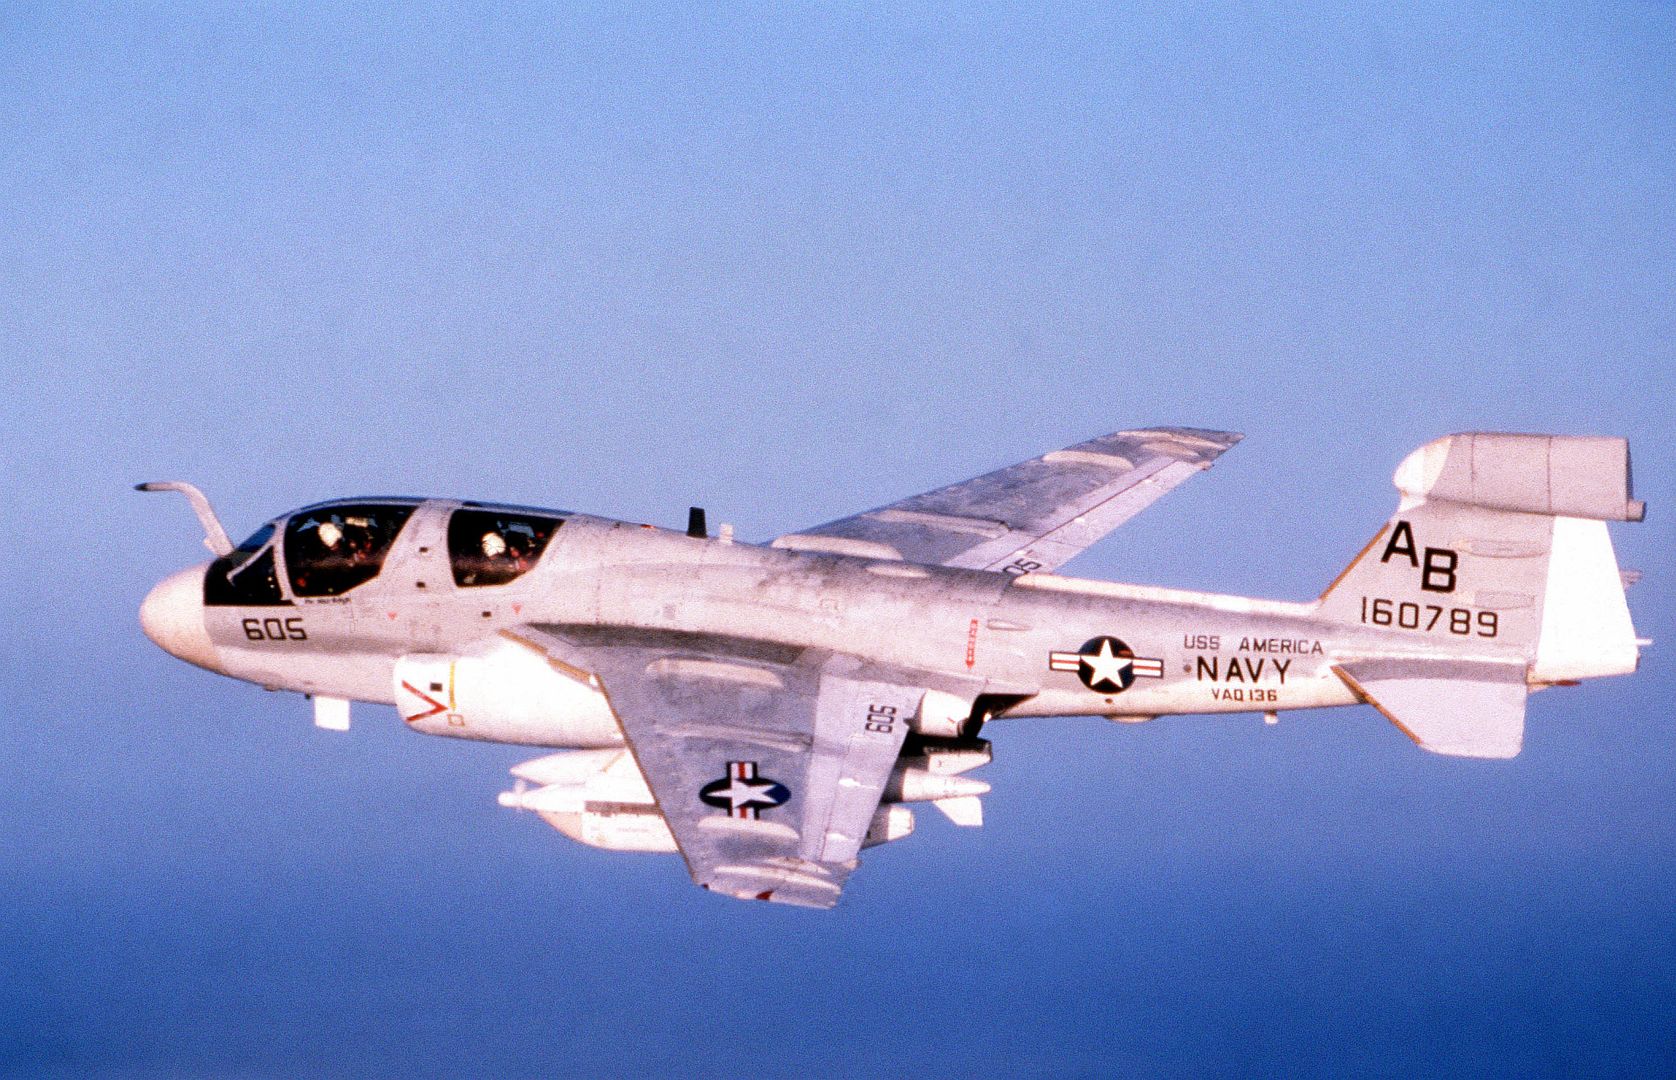 6B Prowler Aircraft Assigned To Tactical Electronic Warfare Squadron 136